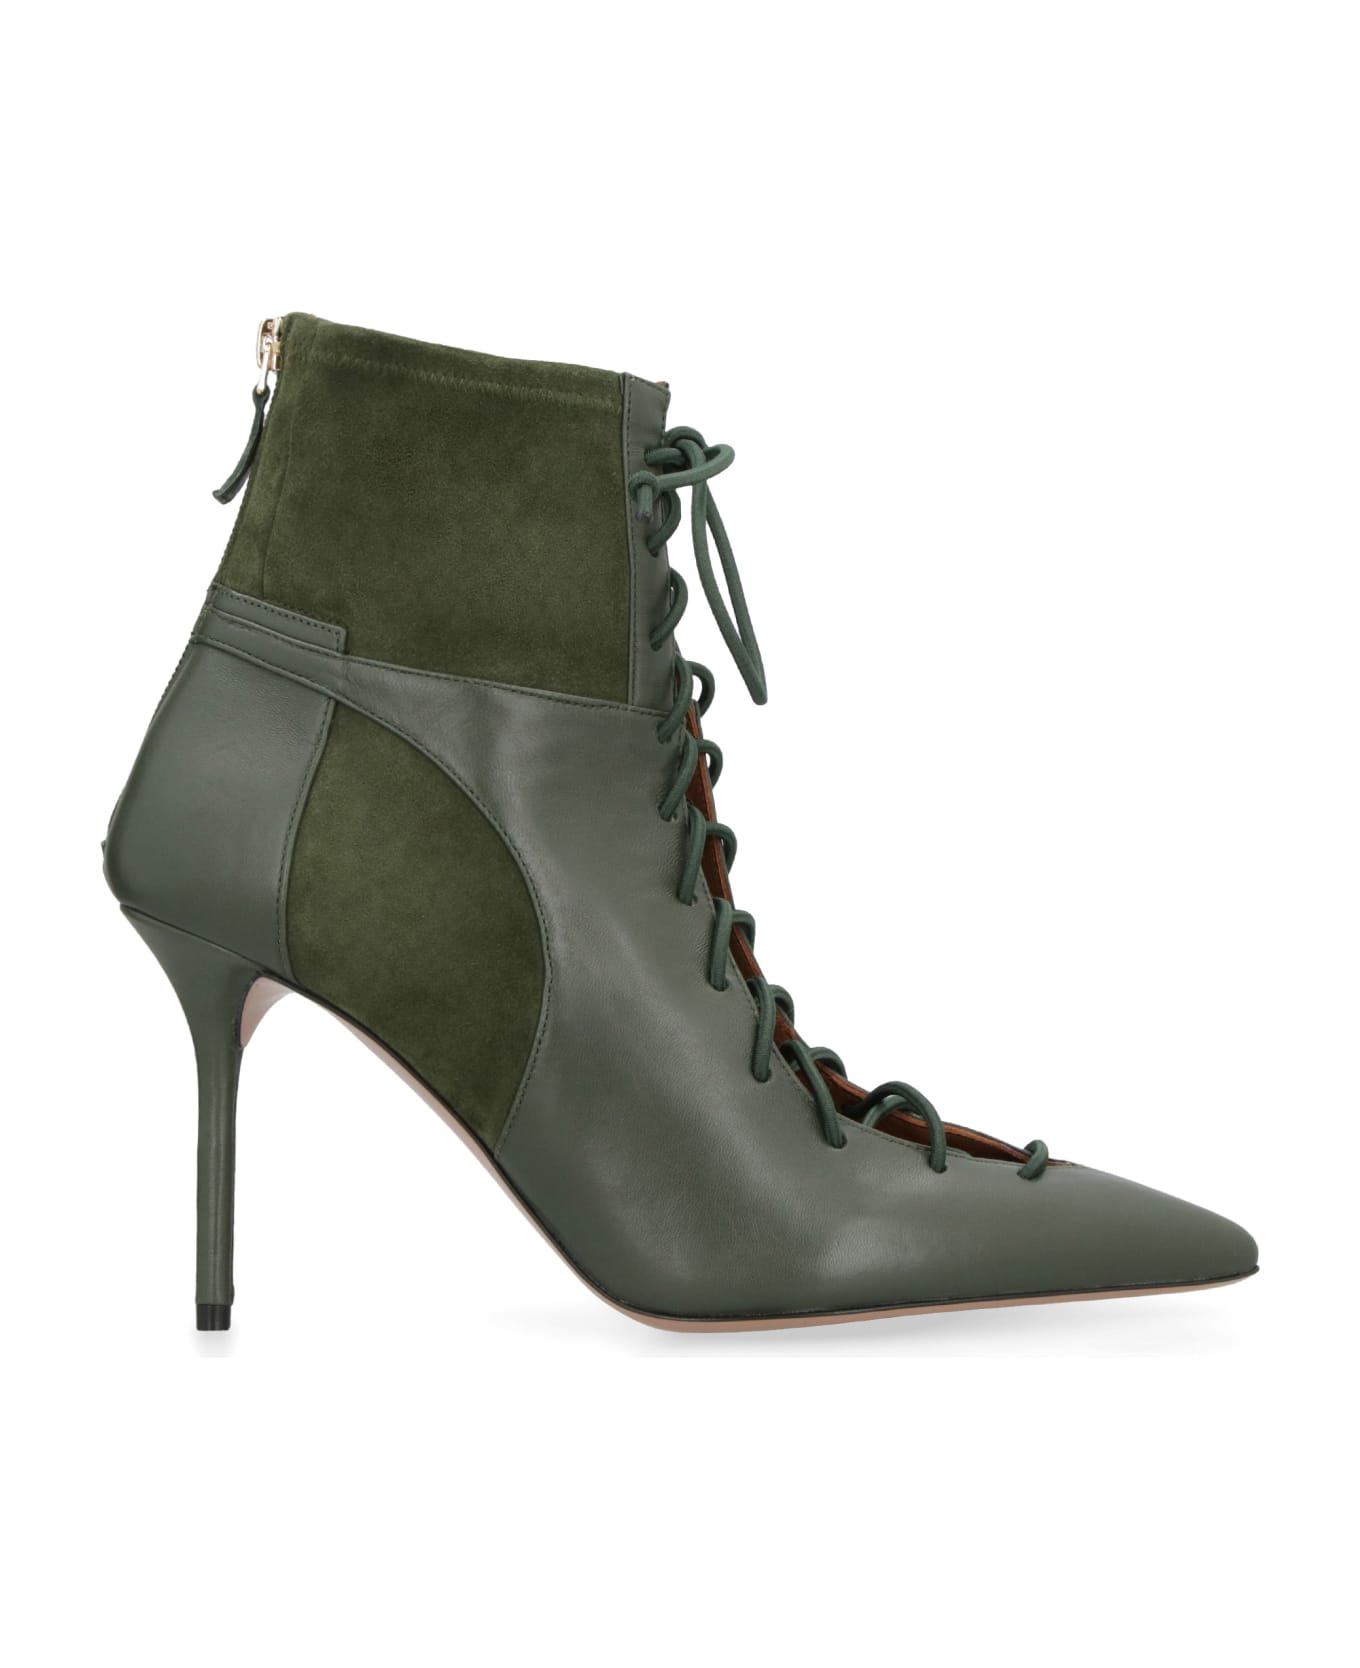 Malone Souliers Montana Suede Ankle Boots - green ブーツ